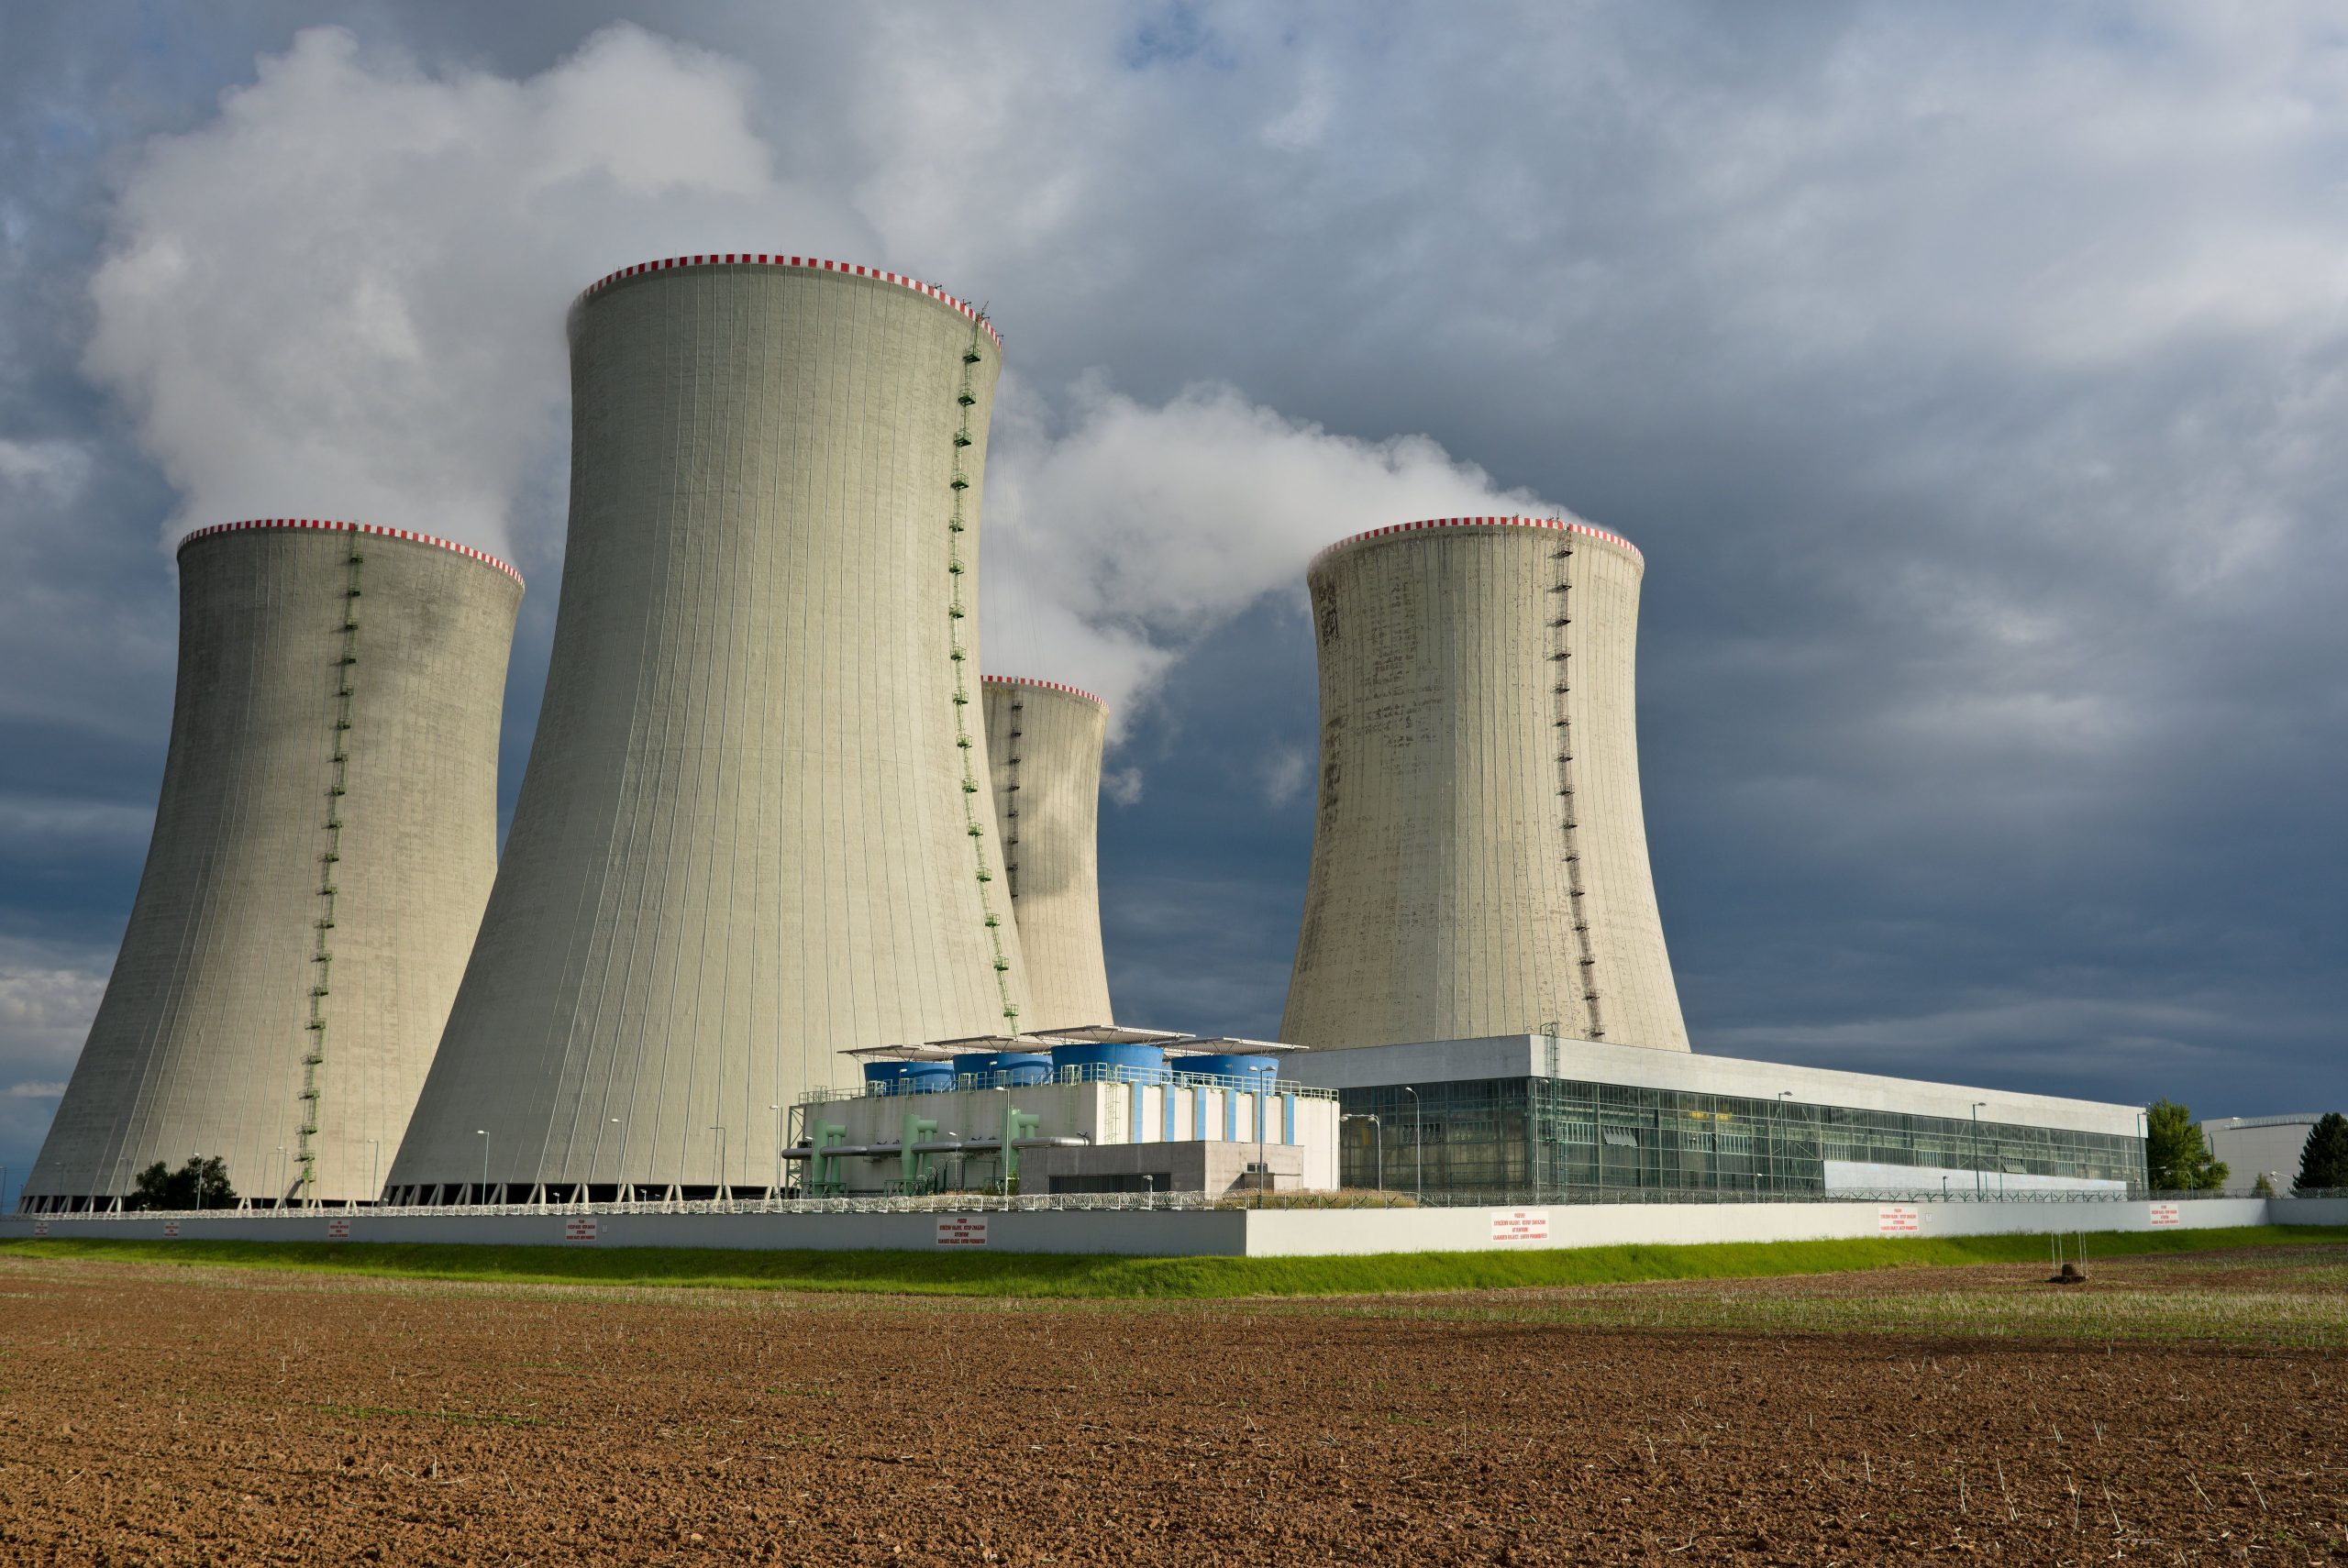 India to go fleet mode in 2023 to build nuclear power reactors